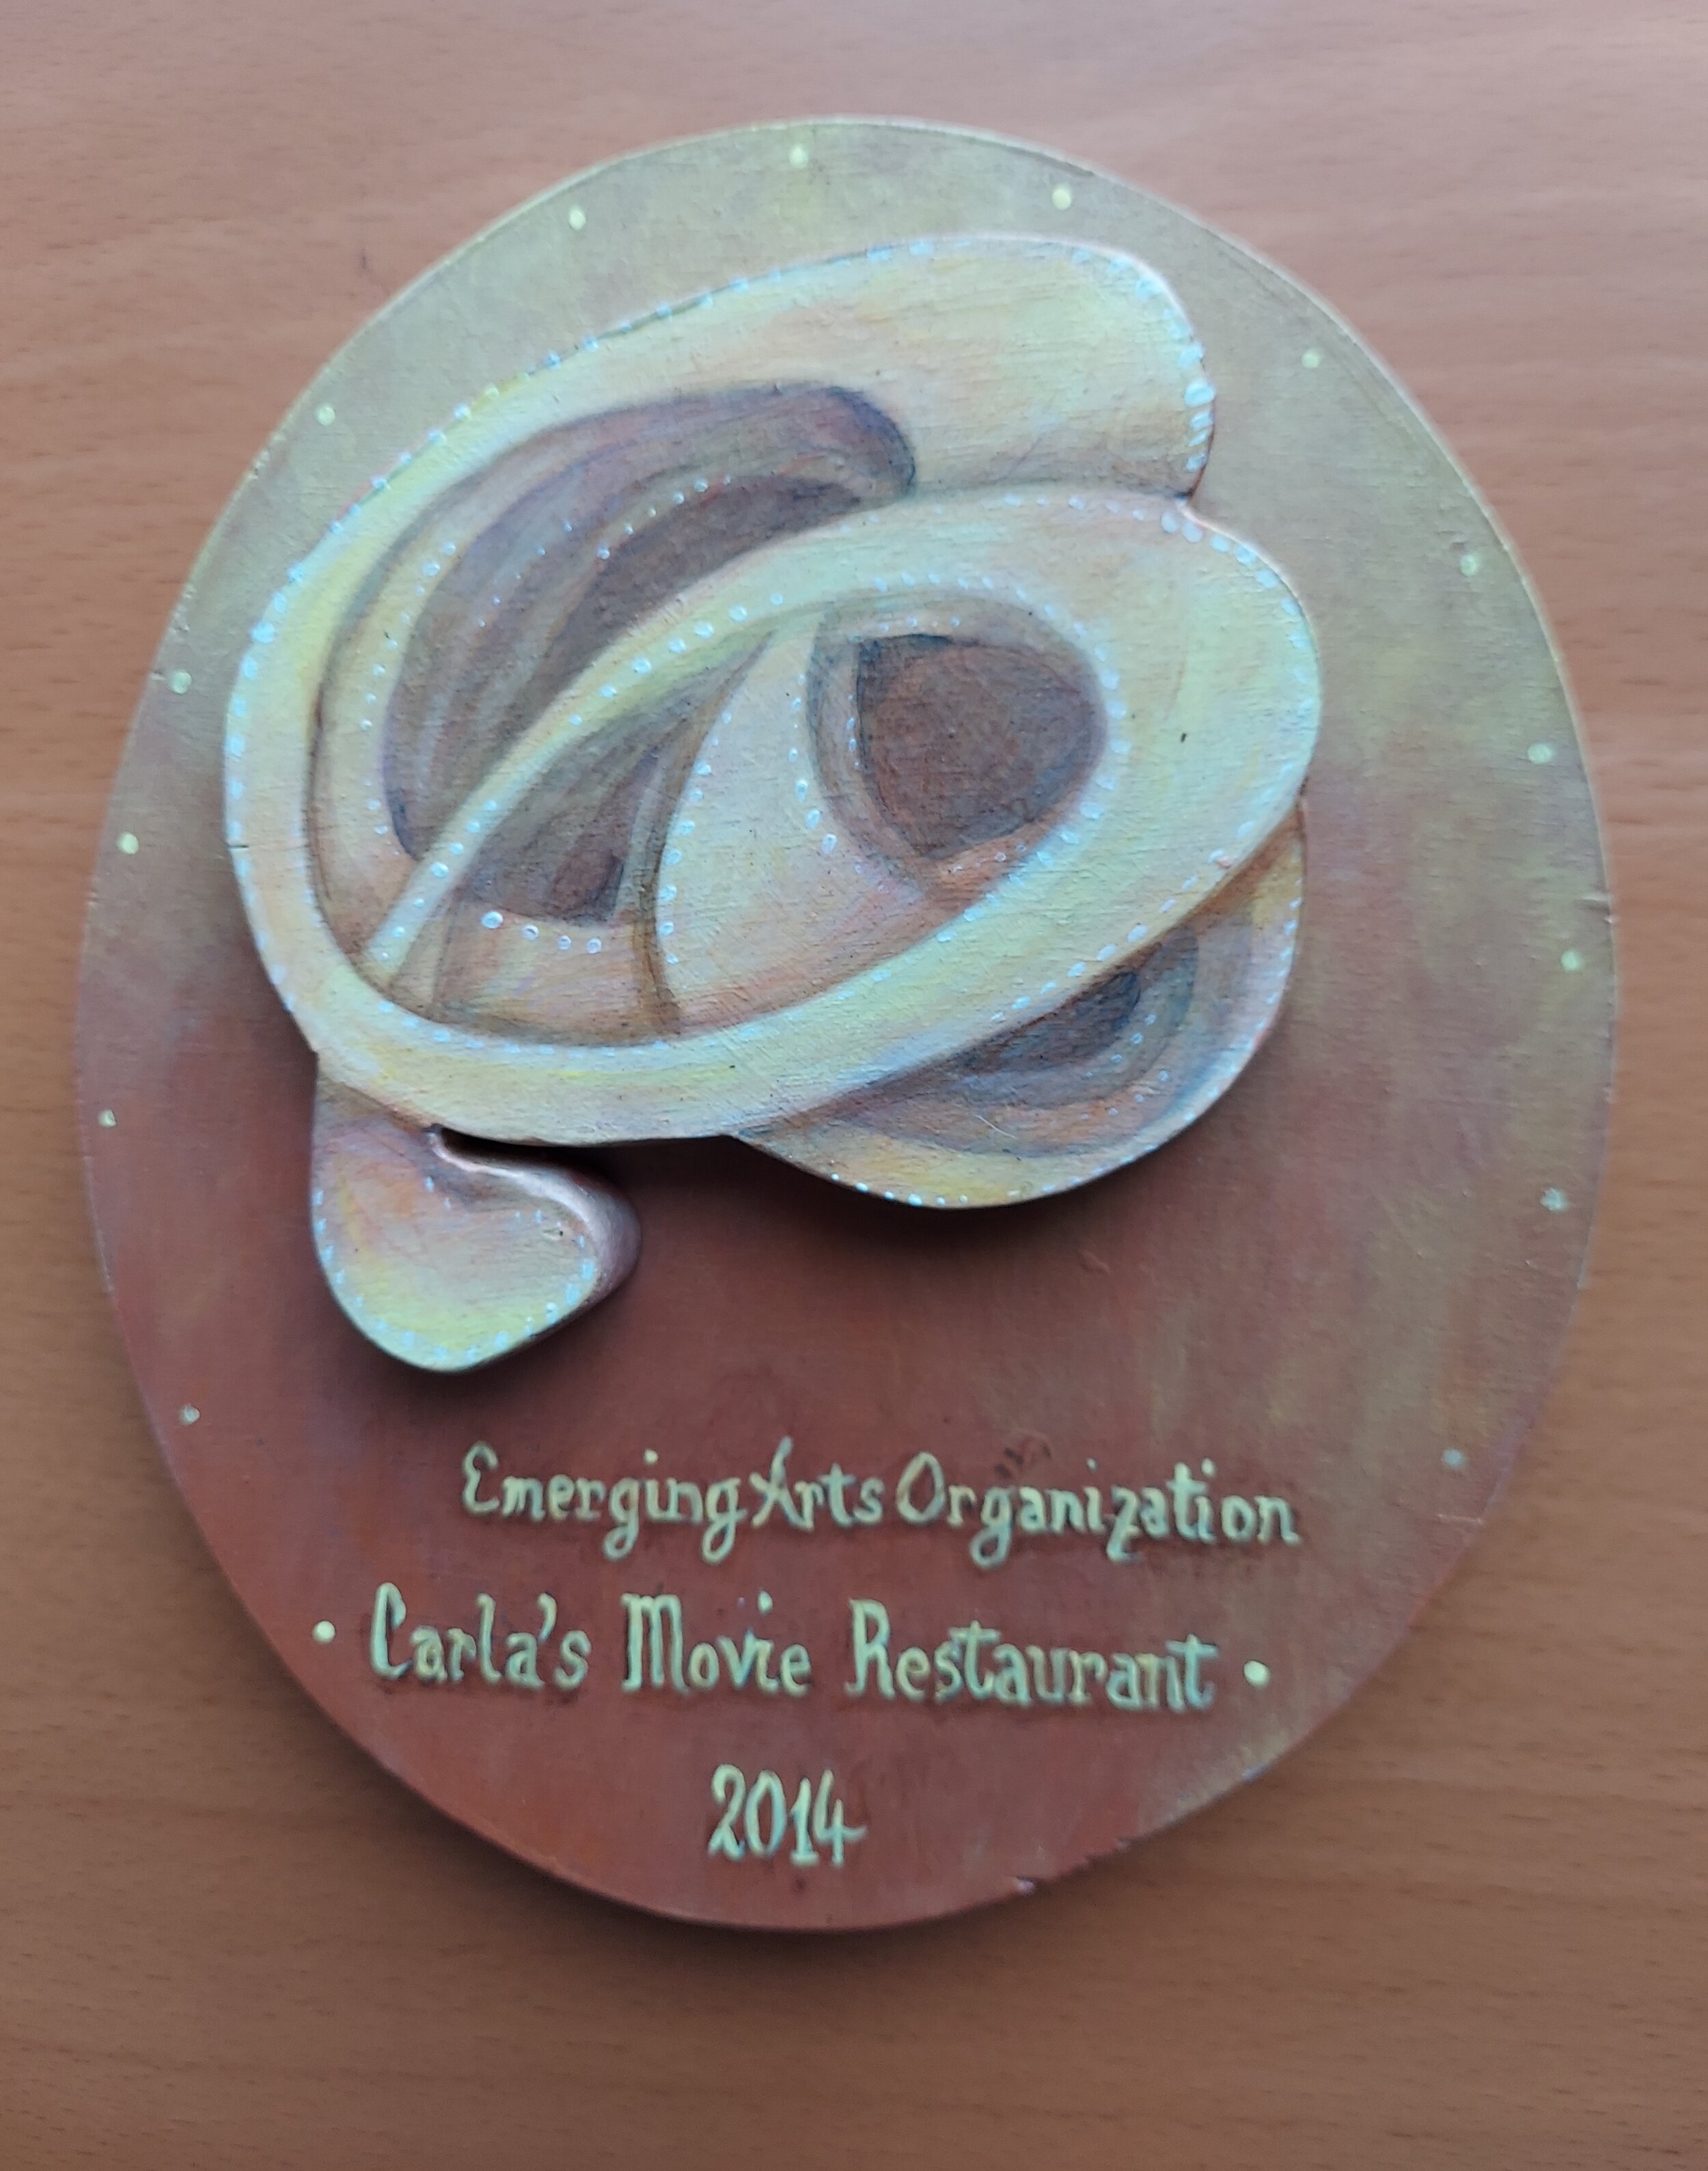 Emerging Arts Award from the Arts Council of LB 